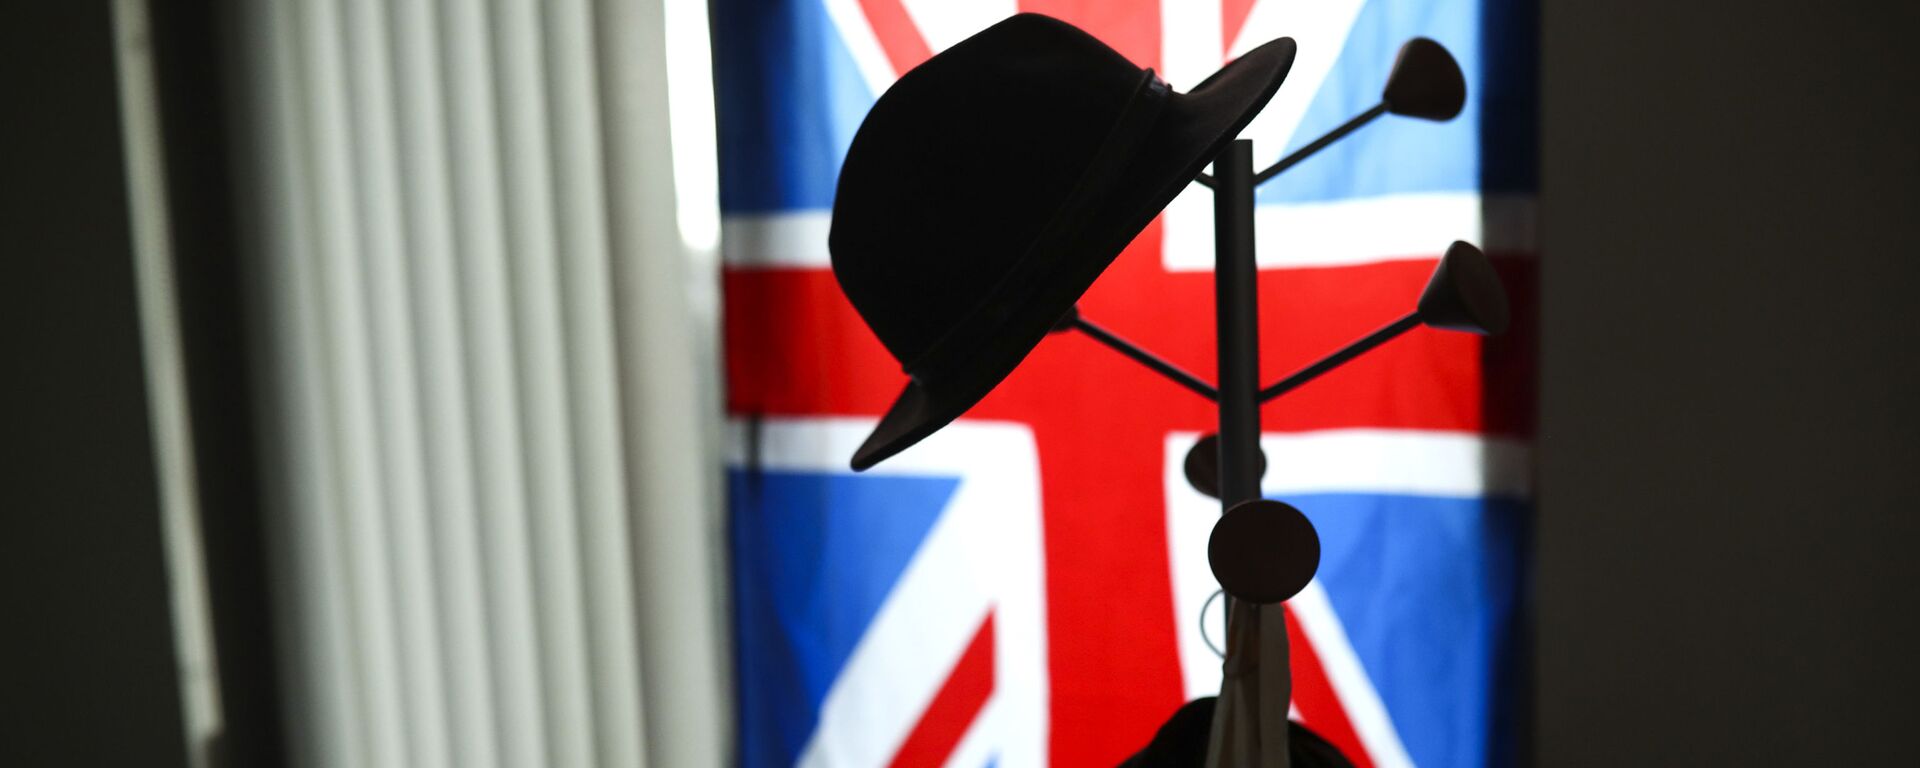 A hat hangs on a coat stand in front of the Union flag (File) - Sputnik International, 1920, 30.12.2021